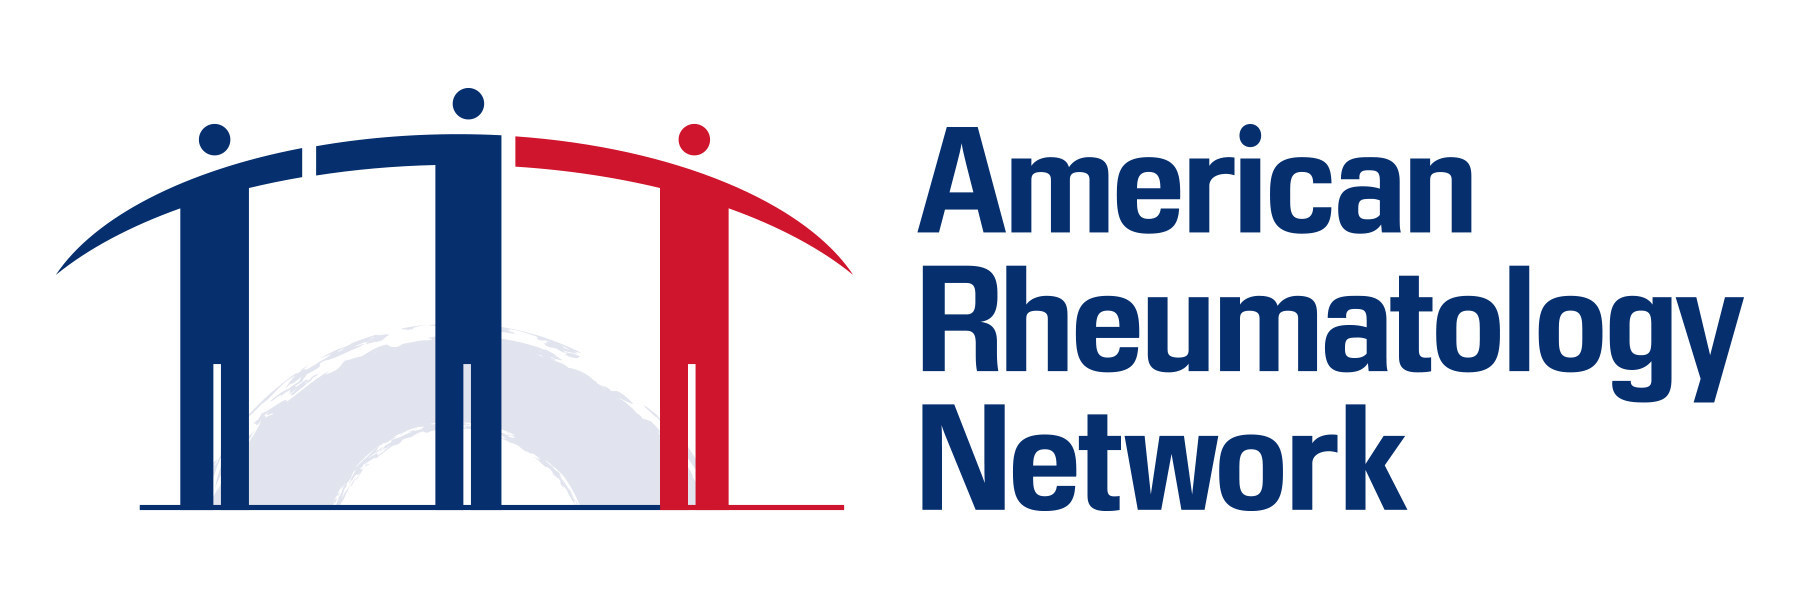 American Rheumatology Network (ARN) is a trusted industry partner and a national group purchasing organization dedicated to supporting independent, community-based rheumatology practices. (PRNewsfoto/American Rheumatology Network)